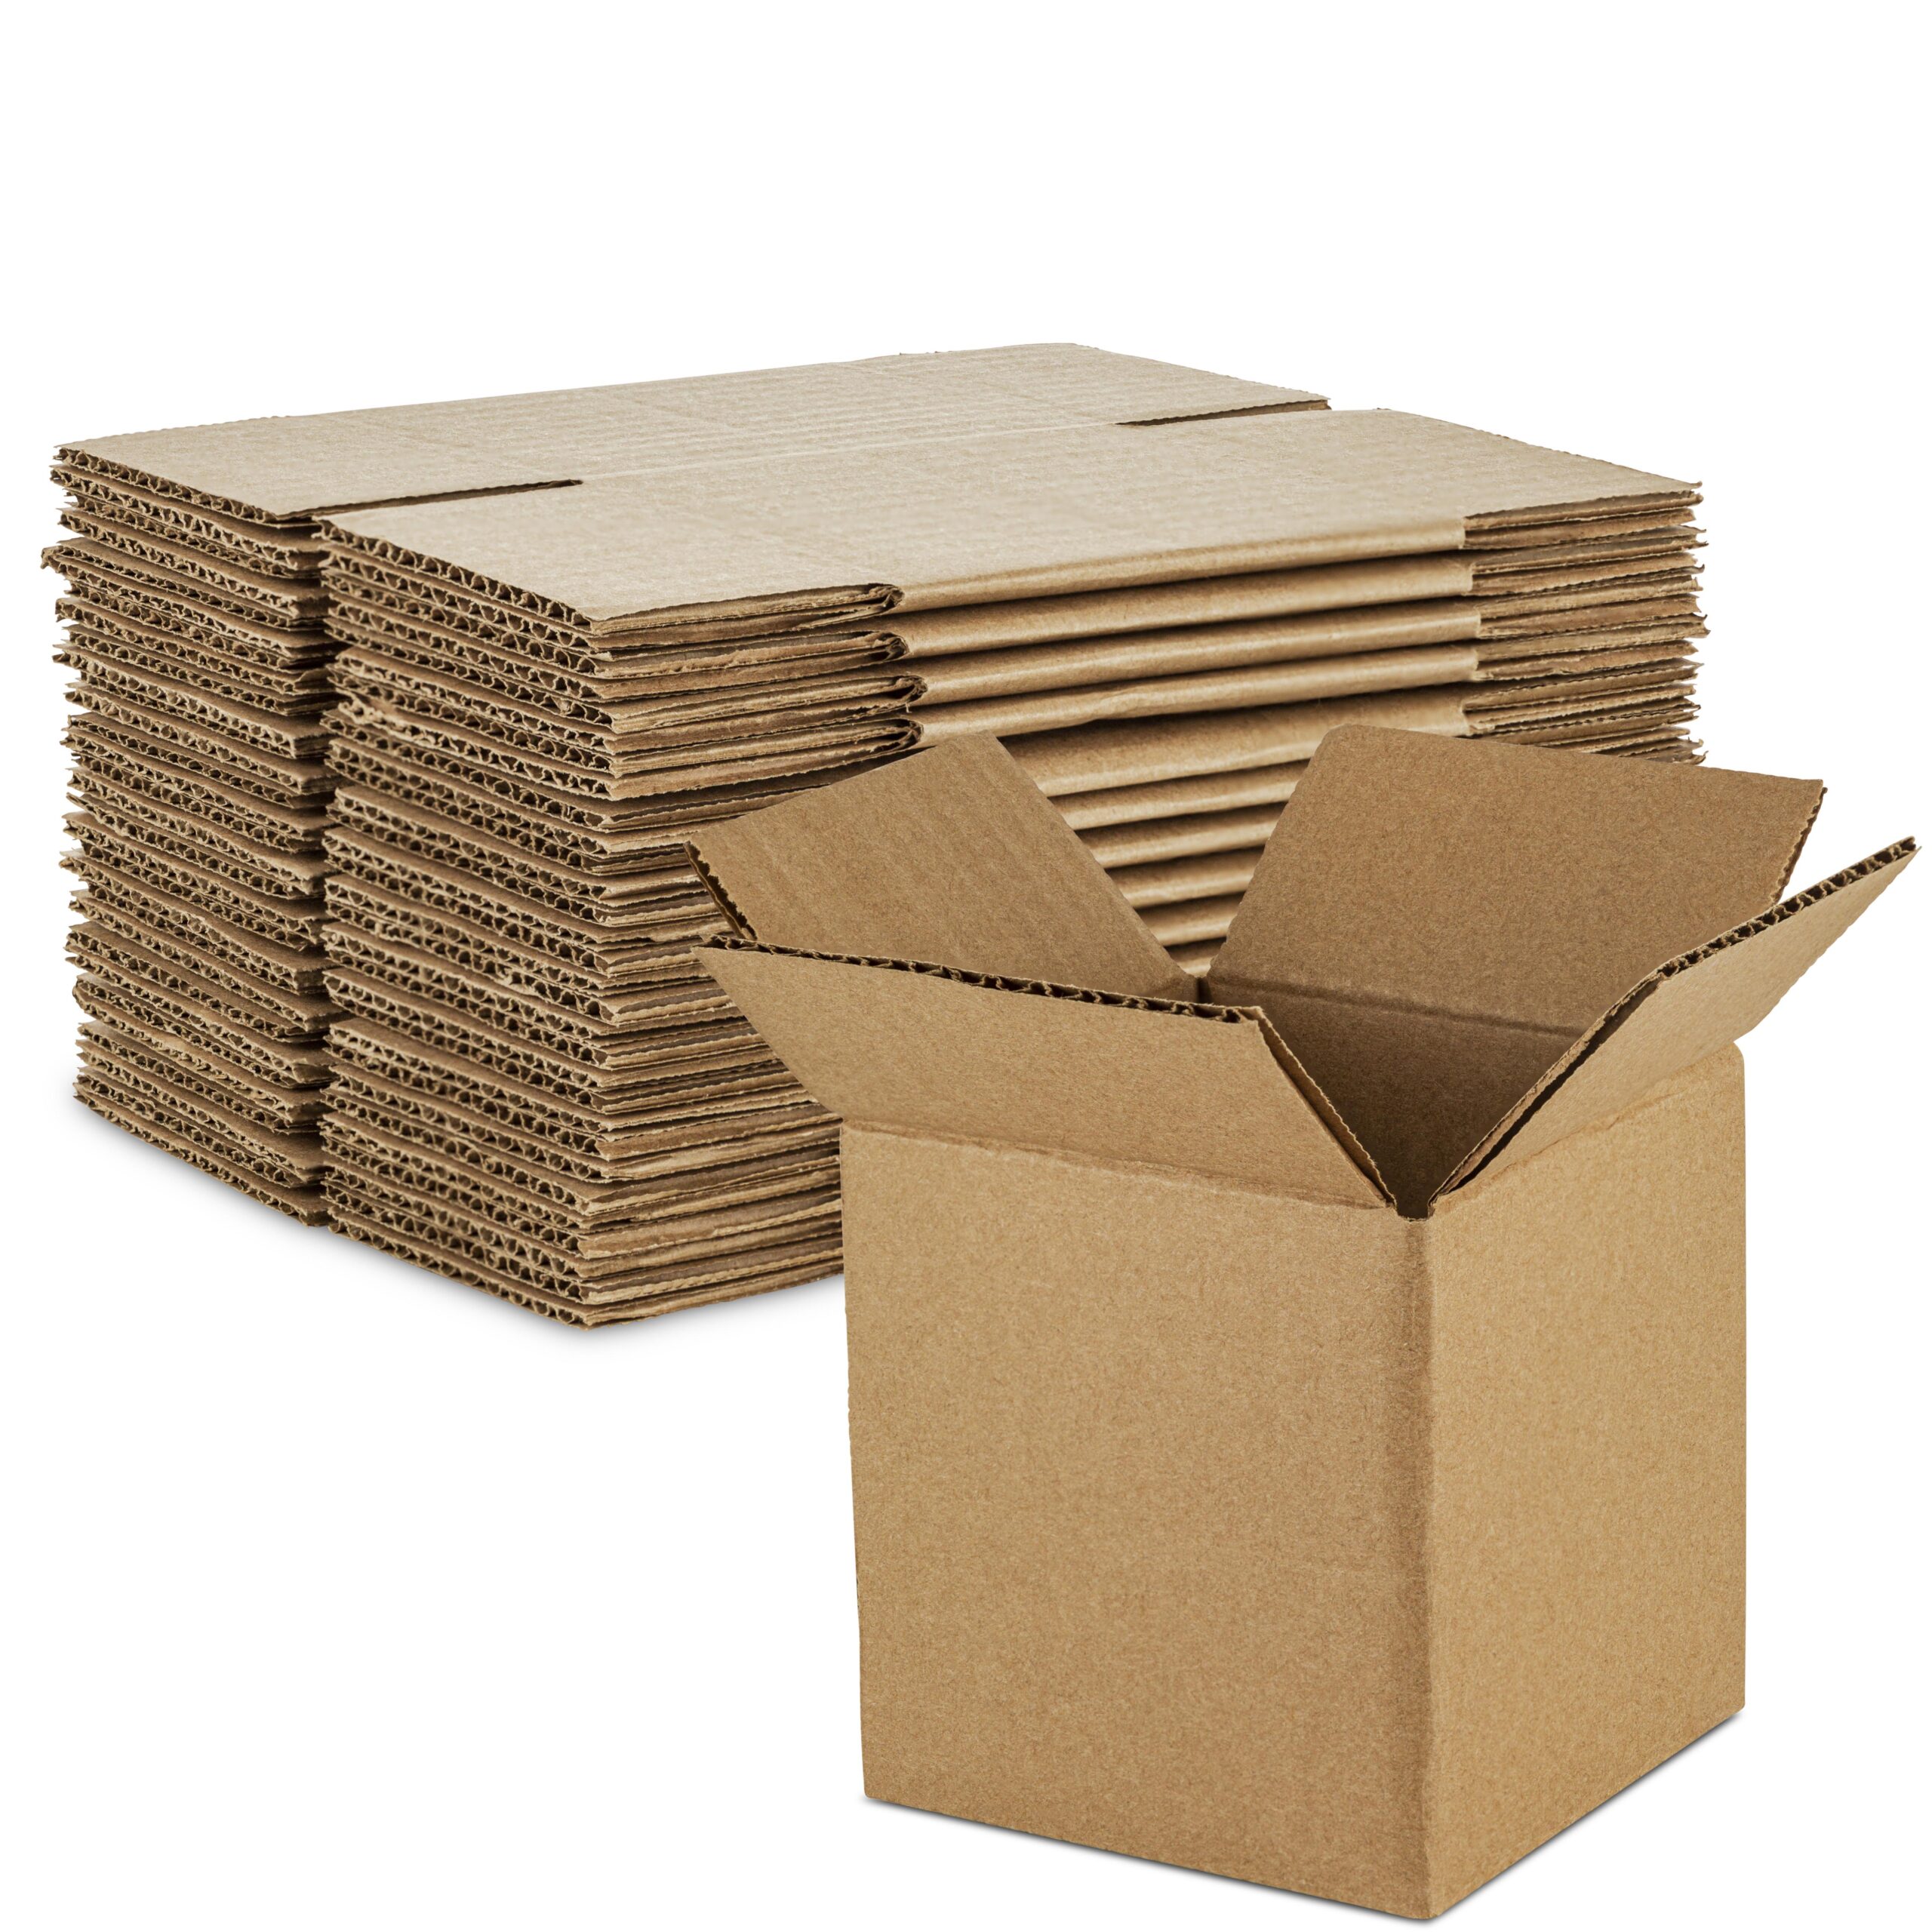 MT Products 5 inch x 5 inch x 5 inch Kraft Brown Cube Corrugated Shipping Boxes - Pack of 10, Size: 5 x 5 x 5